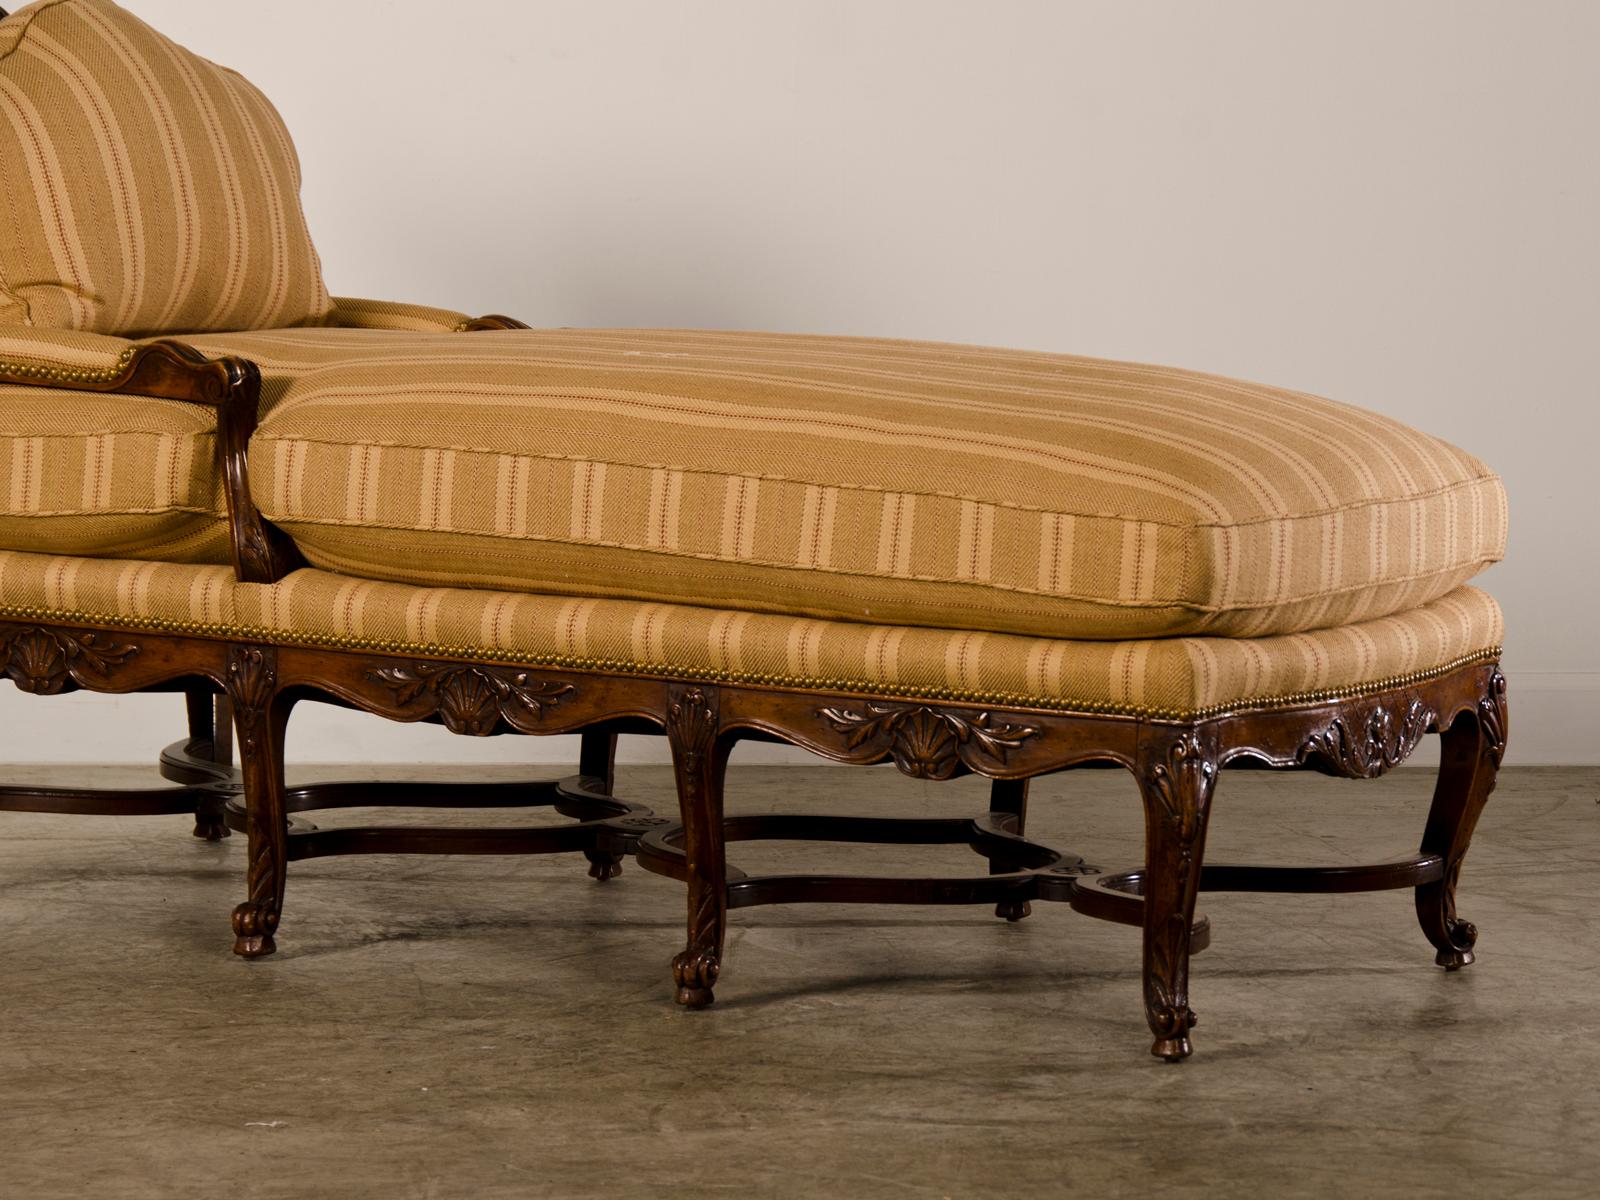 Antique French Régence Period Carved Walnut Chaise Lounge, circa 1720 For Sale 2